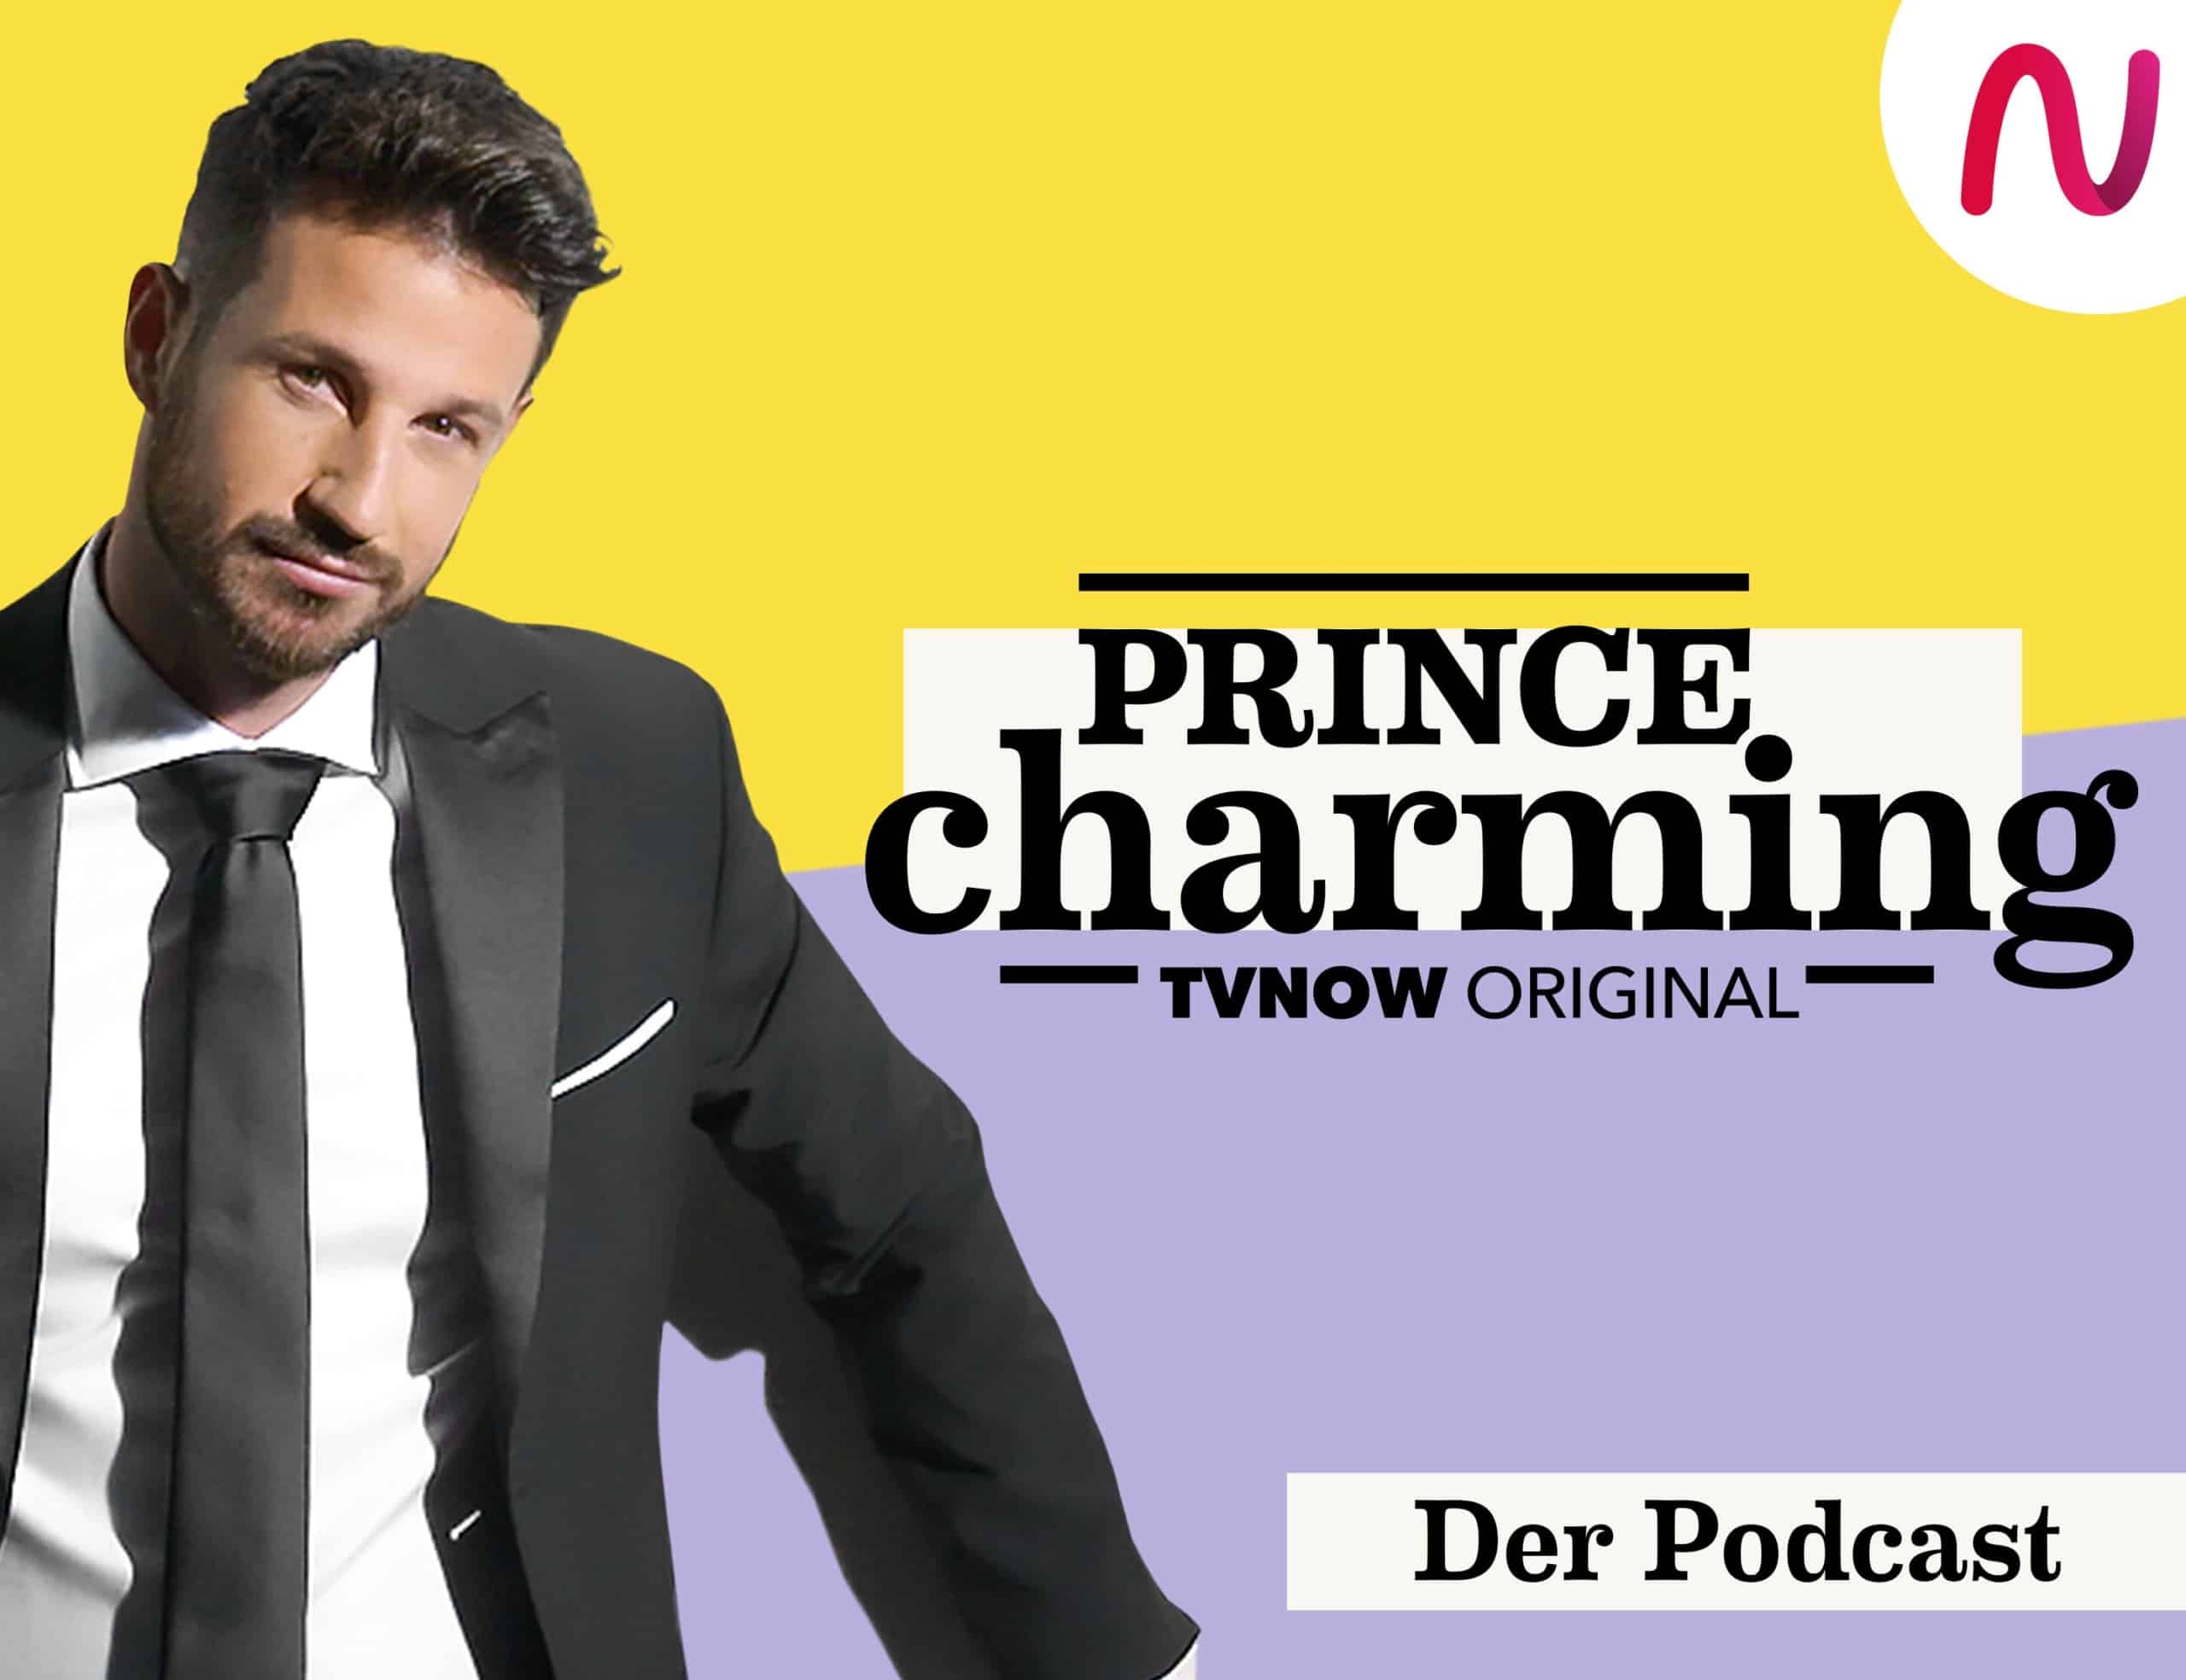 The Prince Charming Podcast